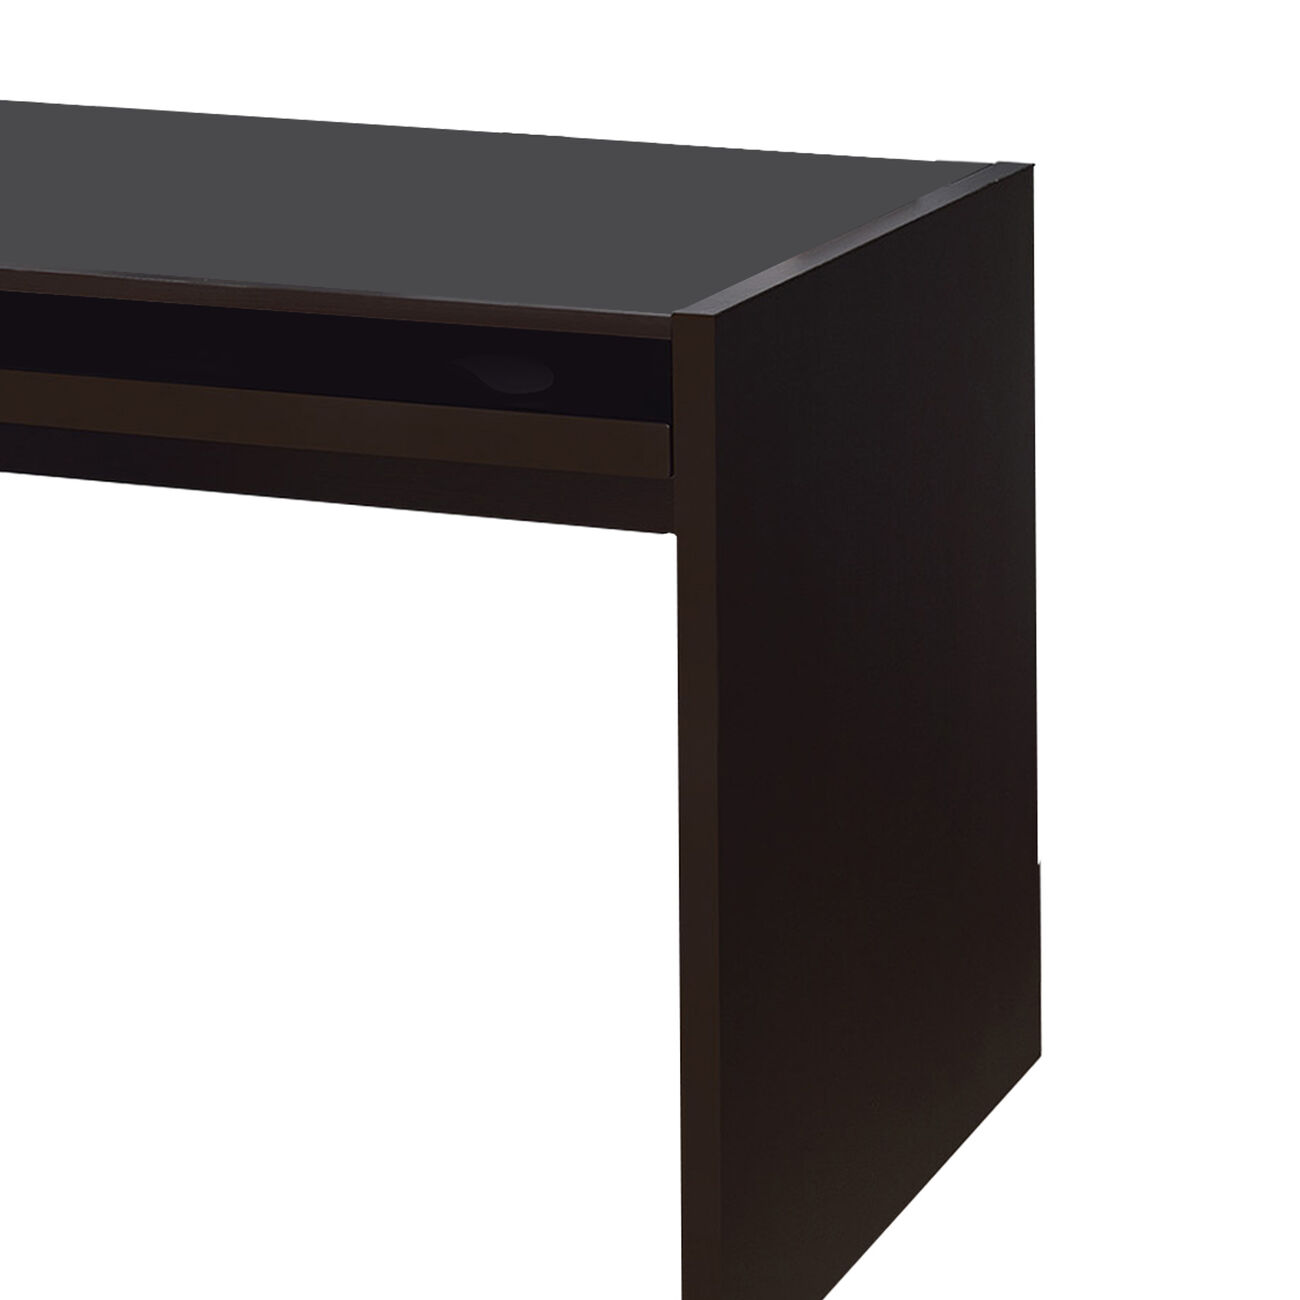 Contemporary Connect-IT Computer Desk, Brown